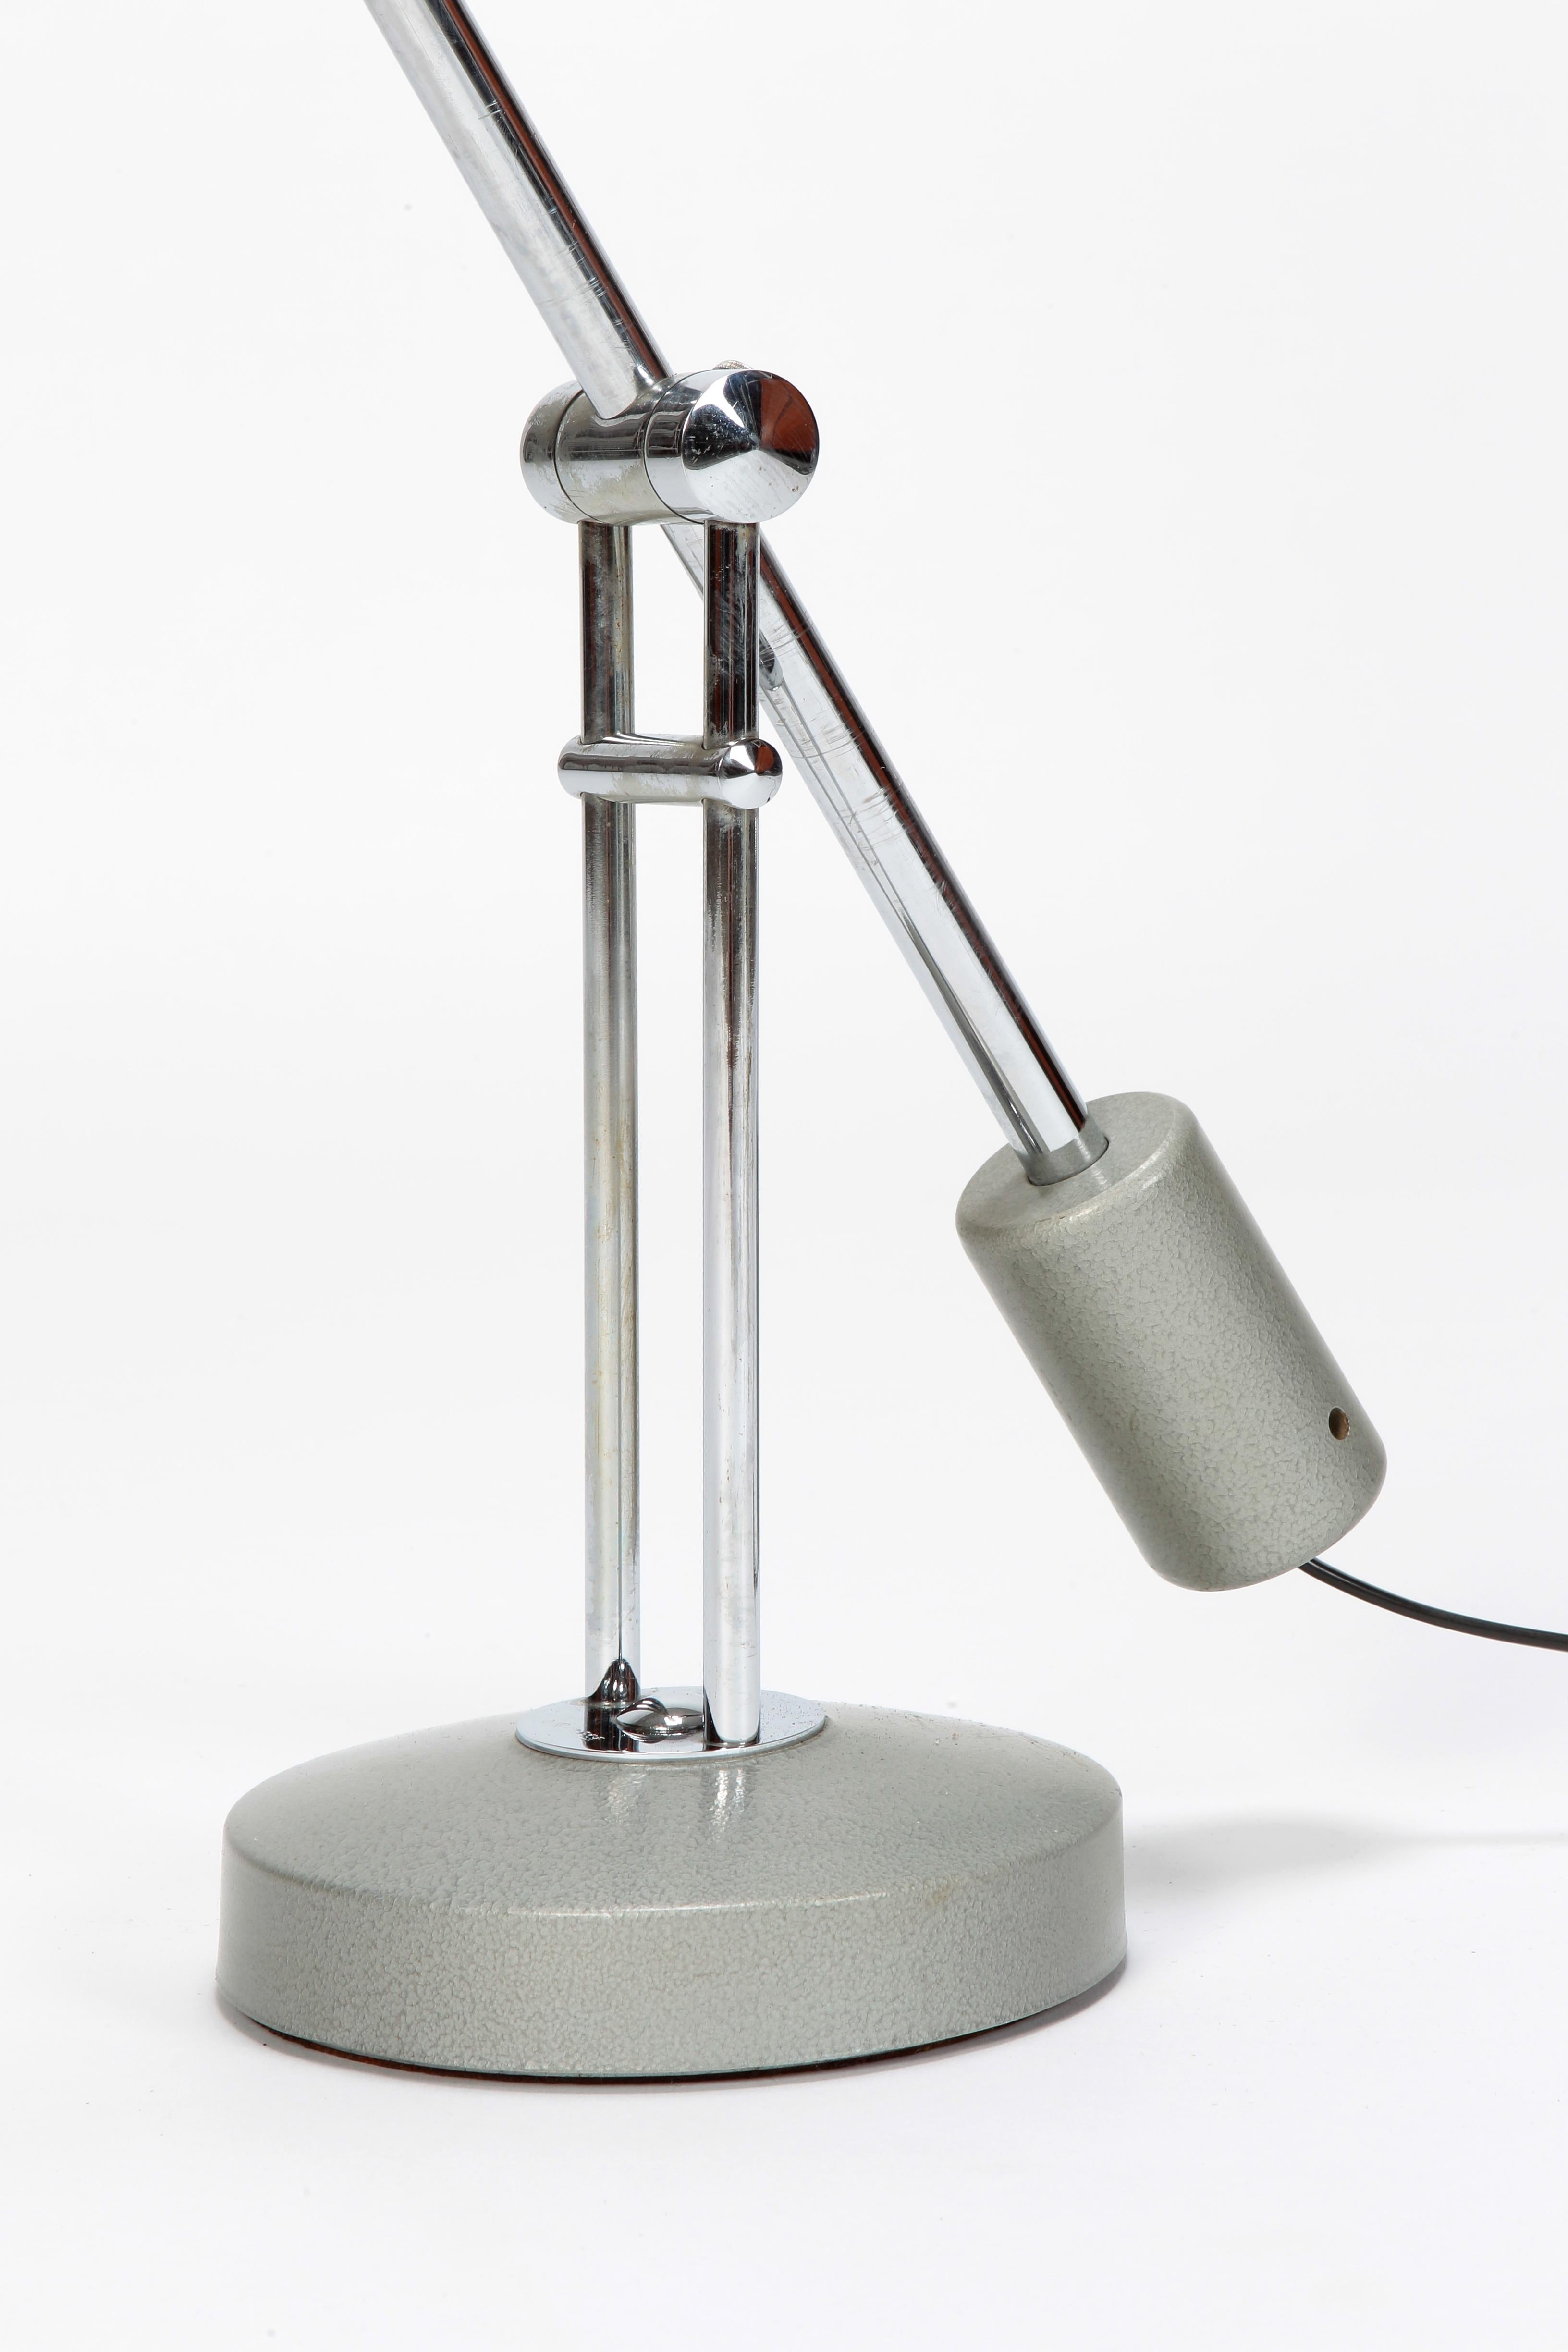 Louis Ferdinand Solère table lamp manufactured by Solère Paris in the 1950s in France. Adjustable in many ways. Hammer stroke lacquer shade and base connected with a chrome steel frame.